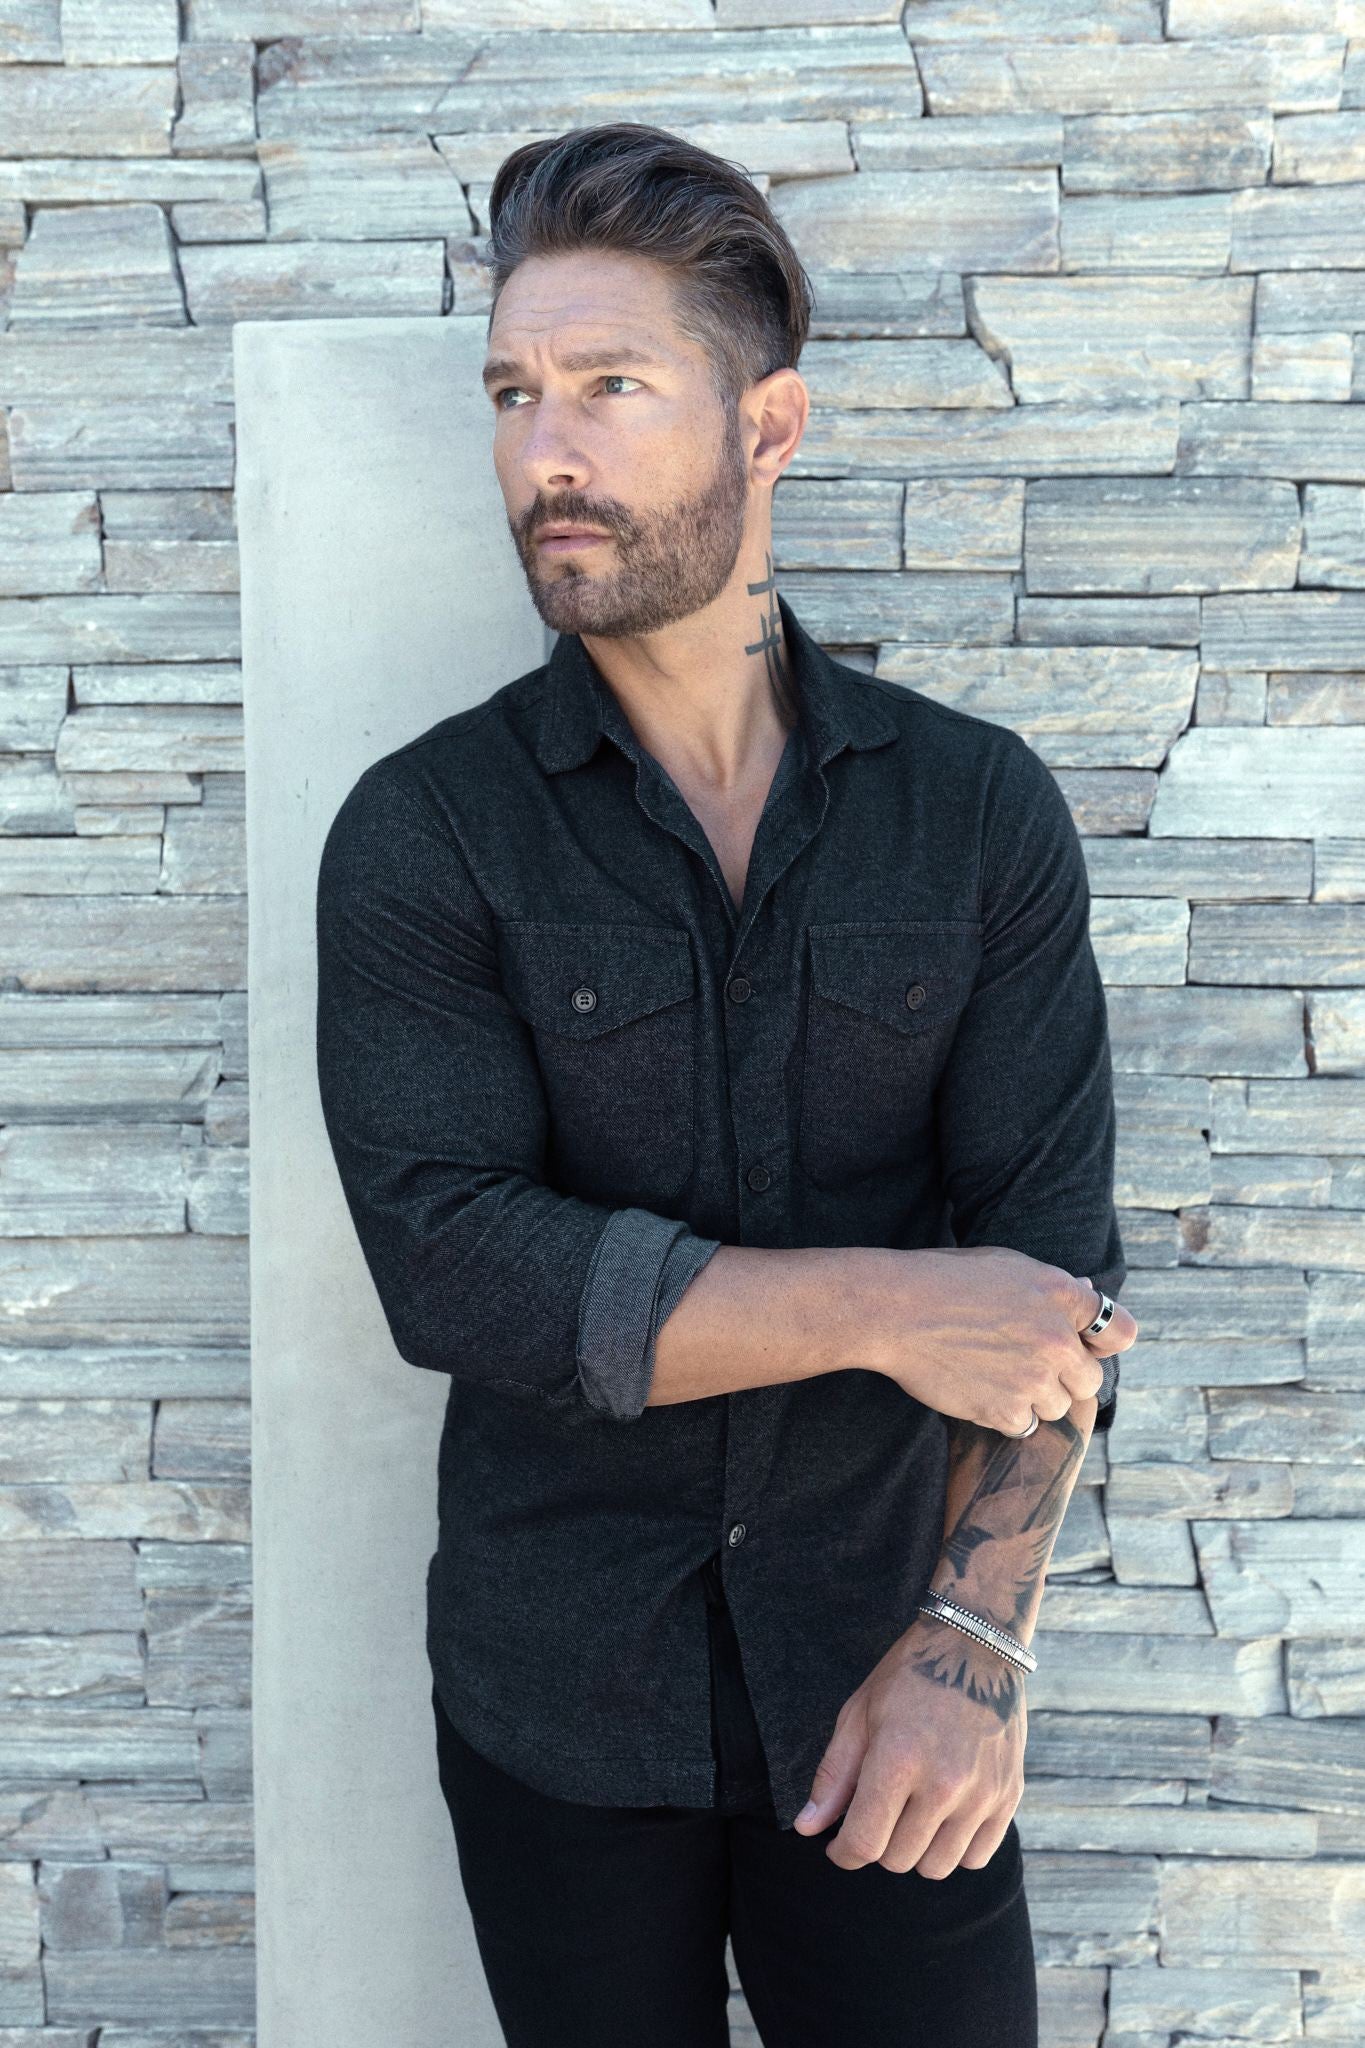 The Untucked Slim Fit Button-Up Shirt by WESTON JON BOUCHÉR